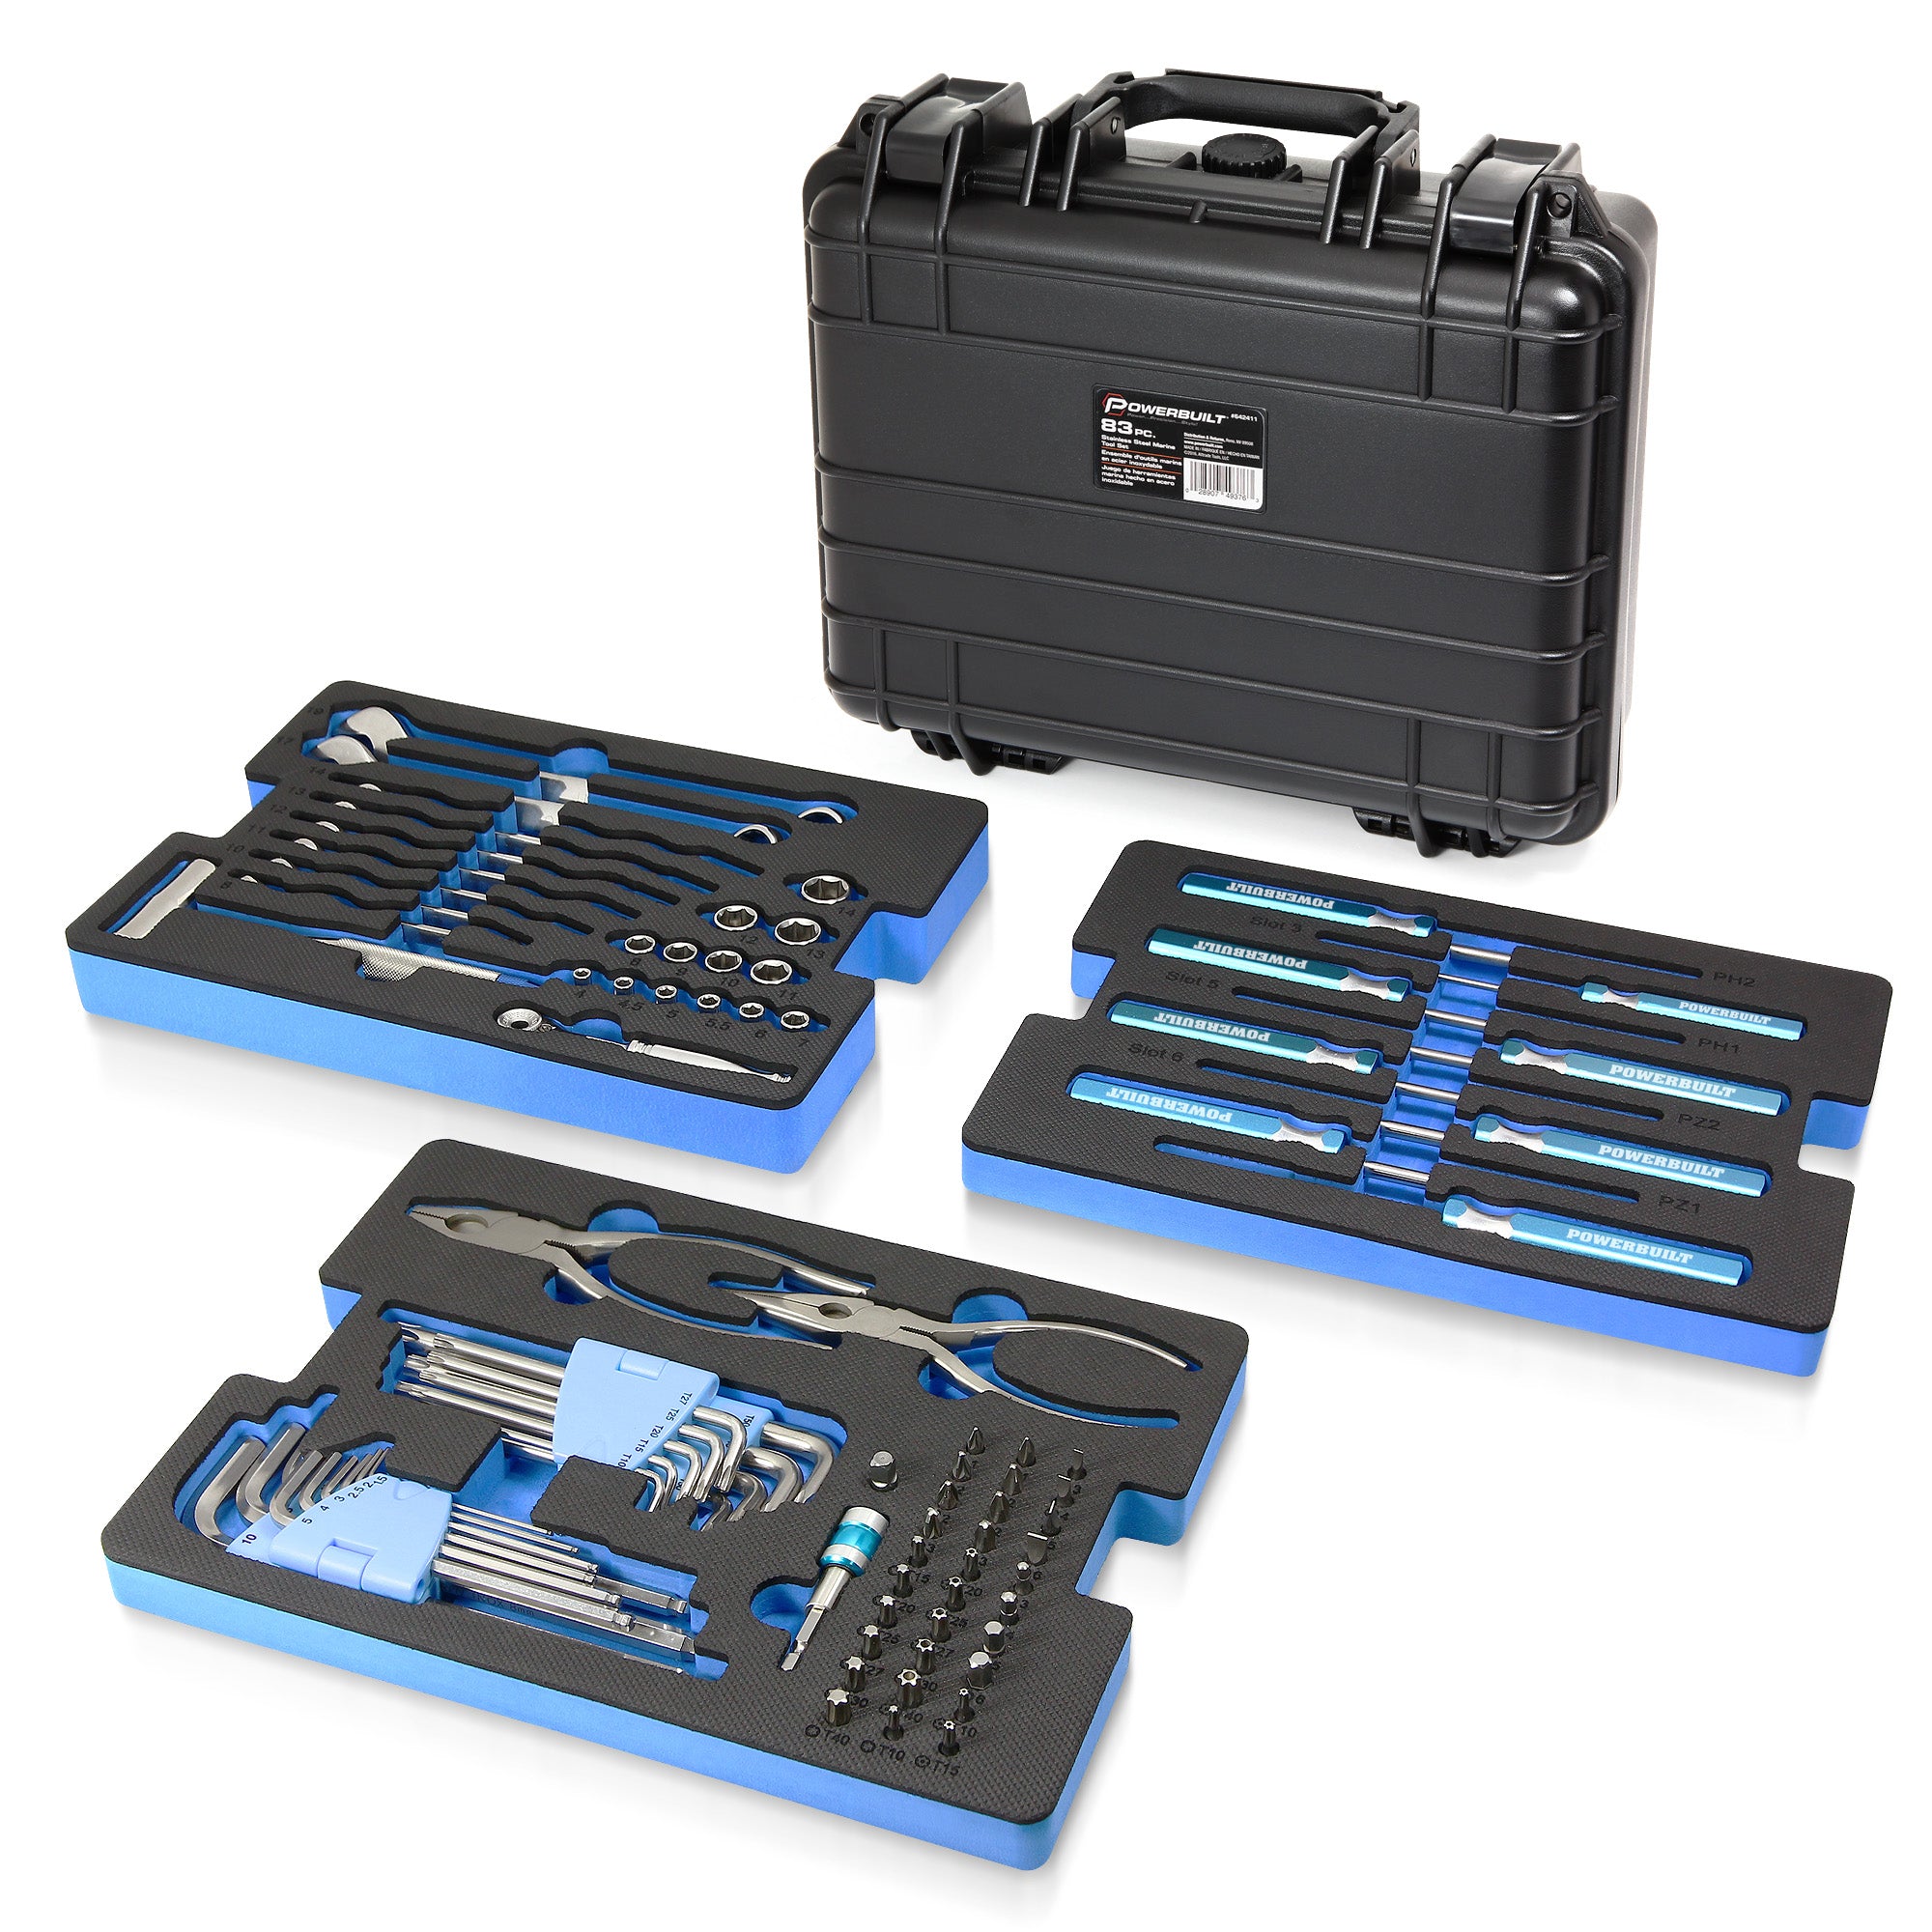 Lippert Boat Tool Kit, 435 Piece Tool Set for Boat Repairs, Included  Carrying Case, 15 Different Items, Comprehensive Marine Maintenance Bundle  